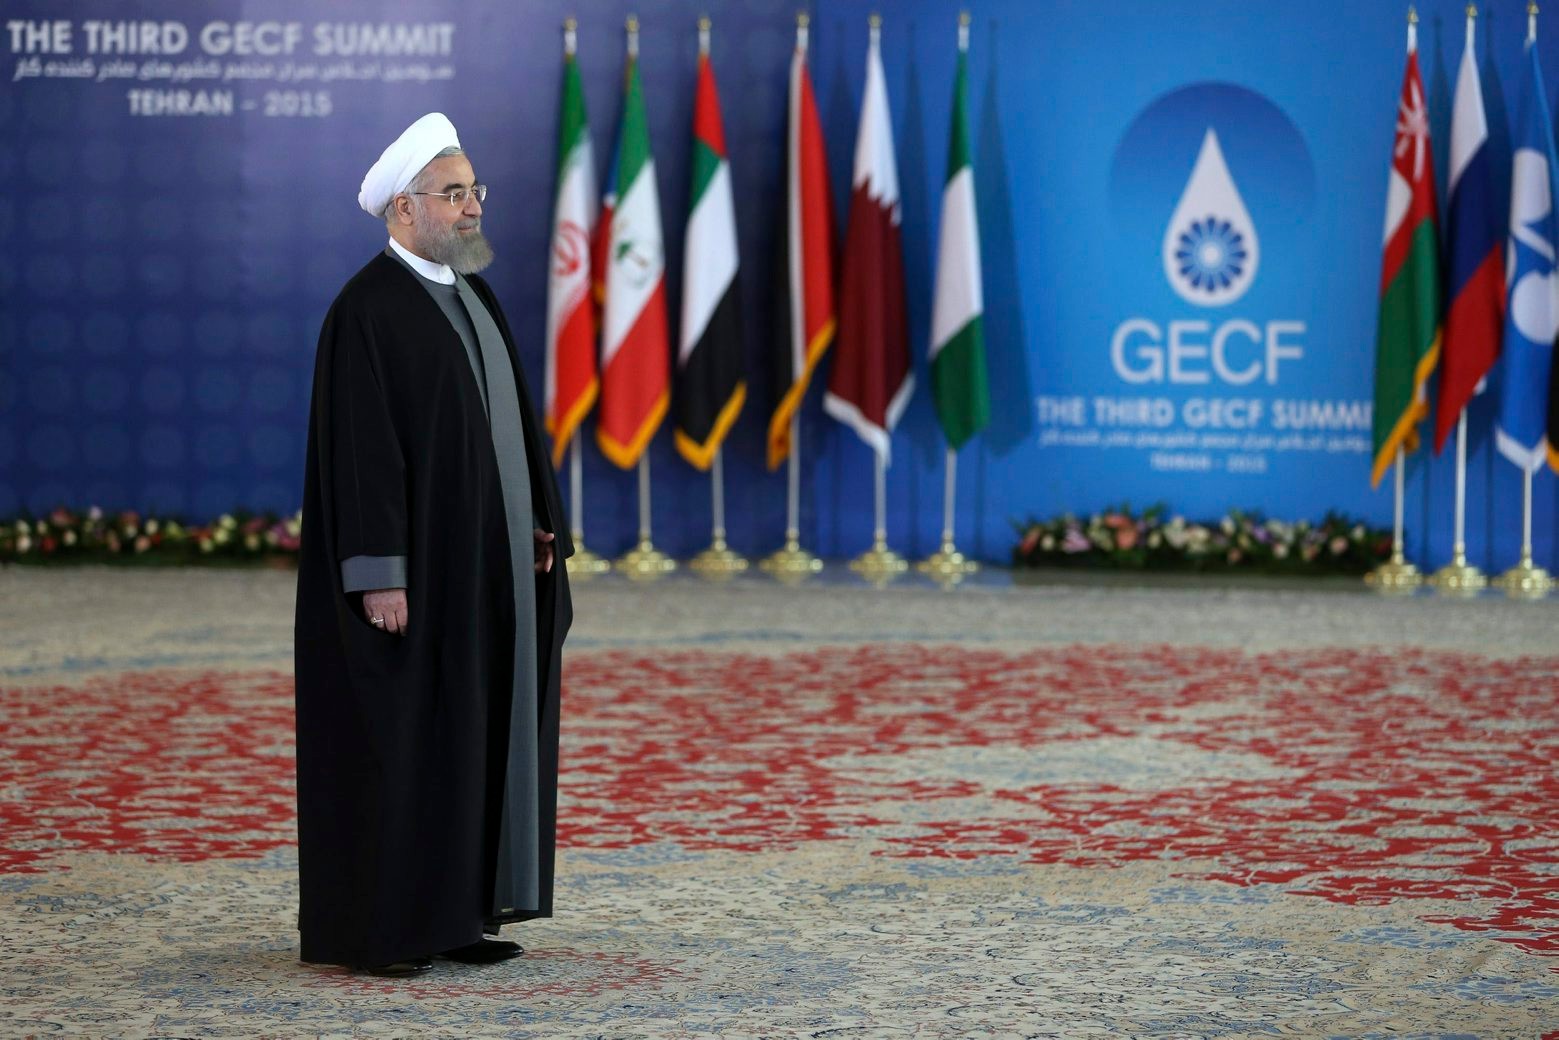 Iranian President Hassan Rouhani stands while waiting to welcome leaders of Gas Exporting Countries Forum, GECF, to attend their third summit in Tehran, Iran, Monday, Nov. 23, 2015. (AP Photo/Ebrahim Noroozi) Mideast Iran GECF Summit